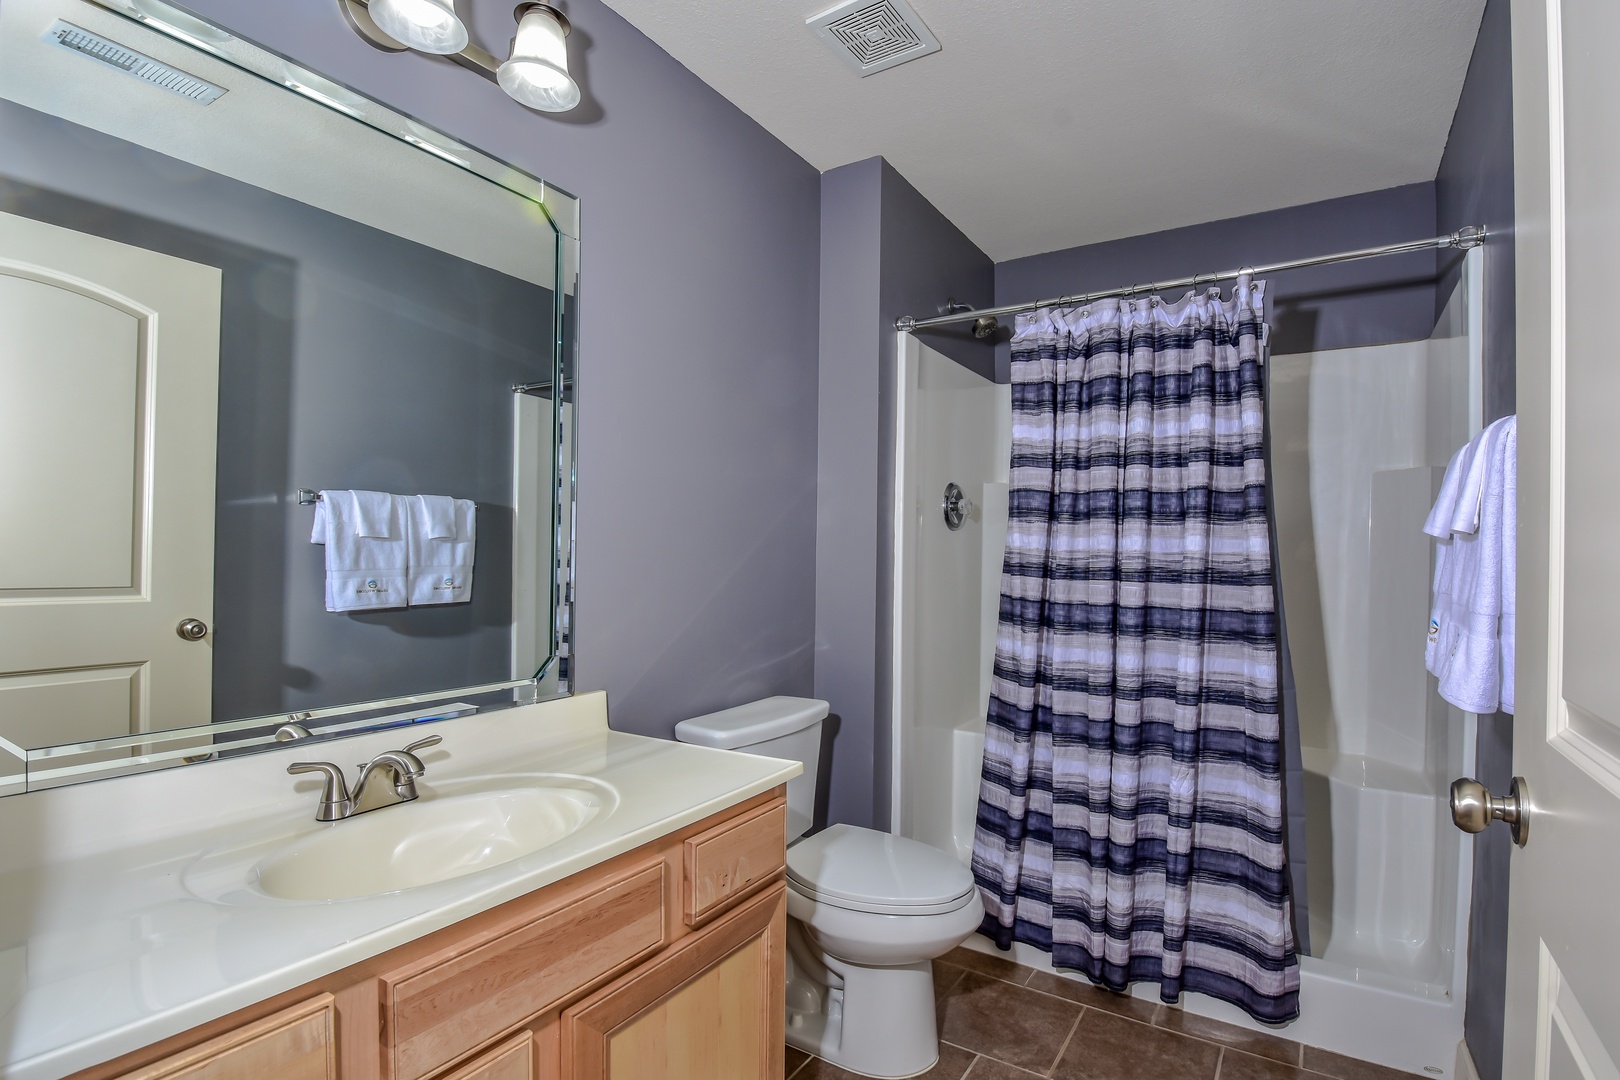 The master ensuite features a single vanity & walk-in shower